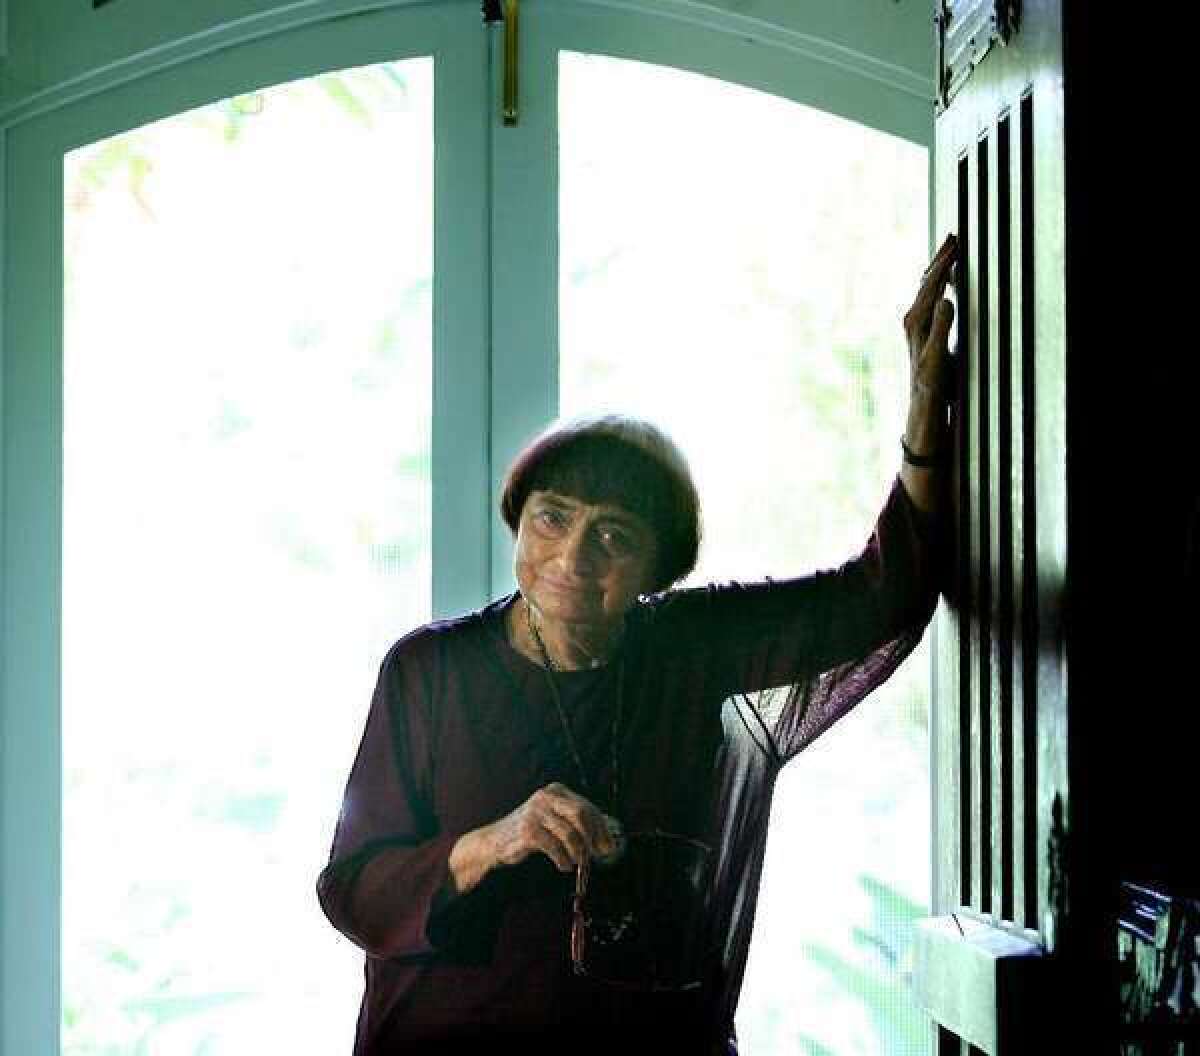 French film director Agnes Varda will present a program of films that have inspired her work during AFI Fest 2013, which takes place Nov. 7-14 in Hollywood.